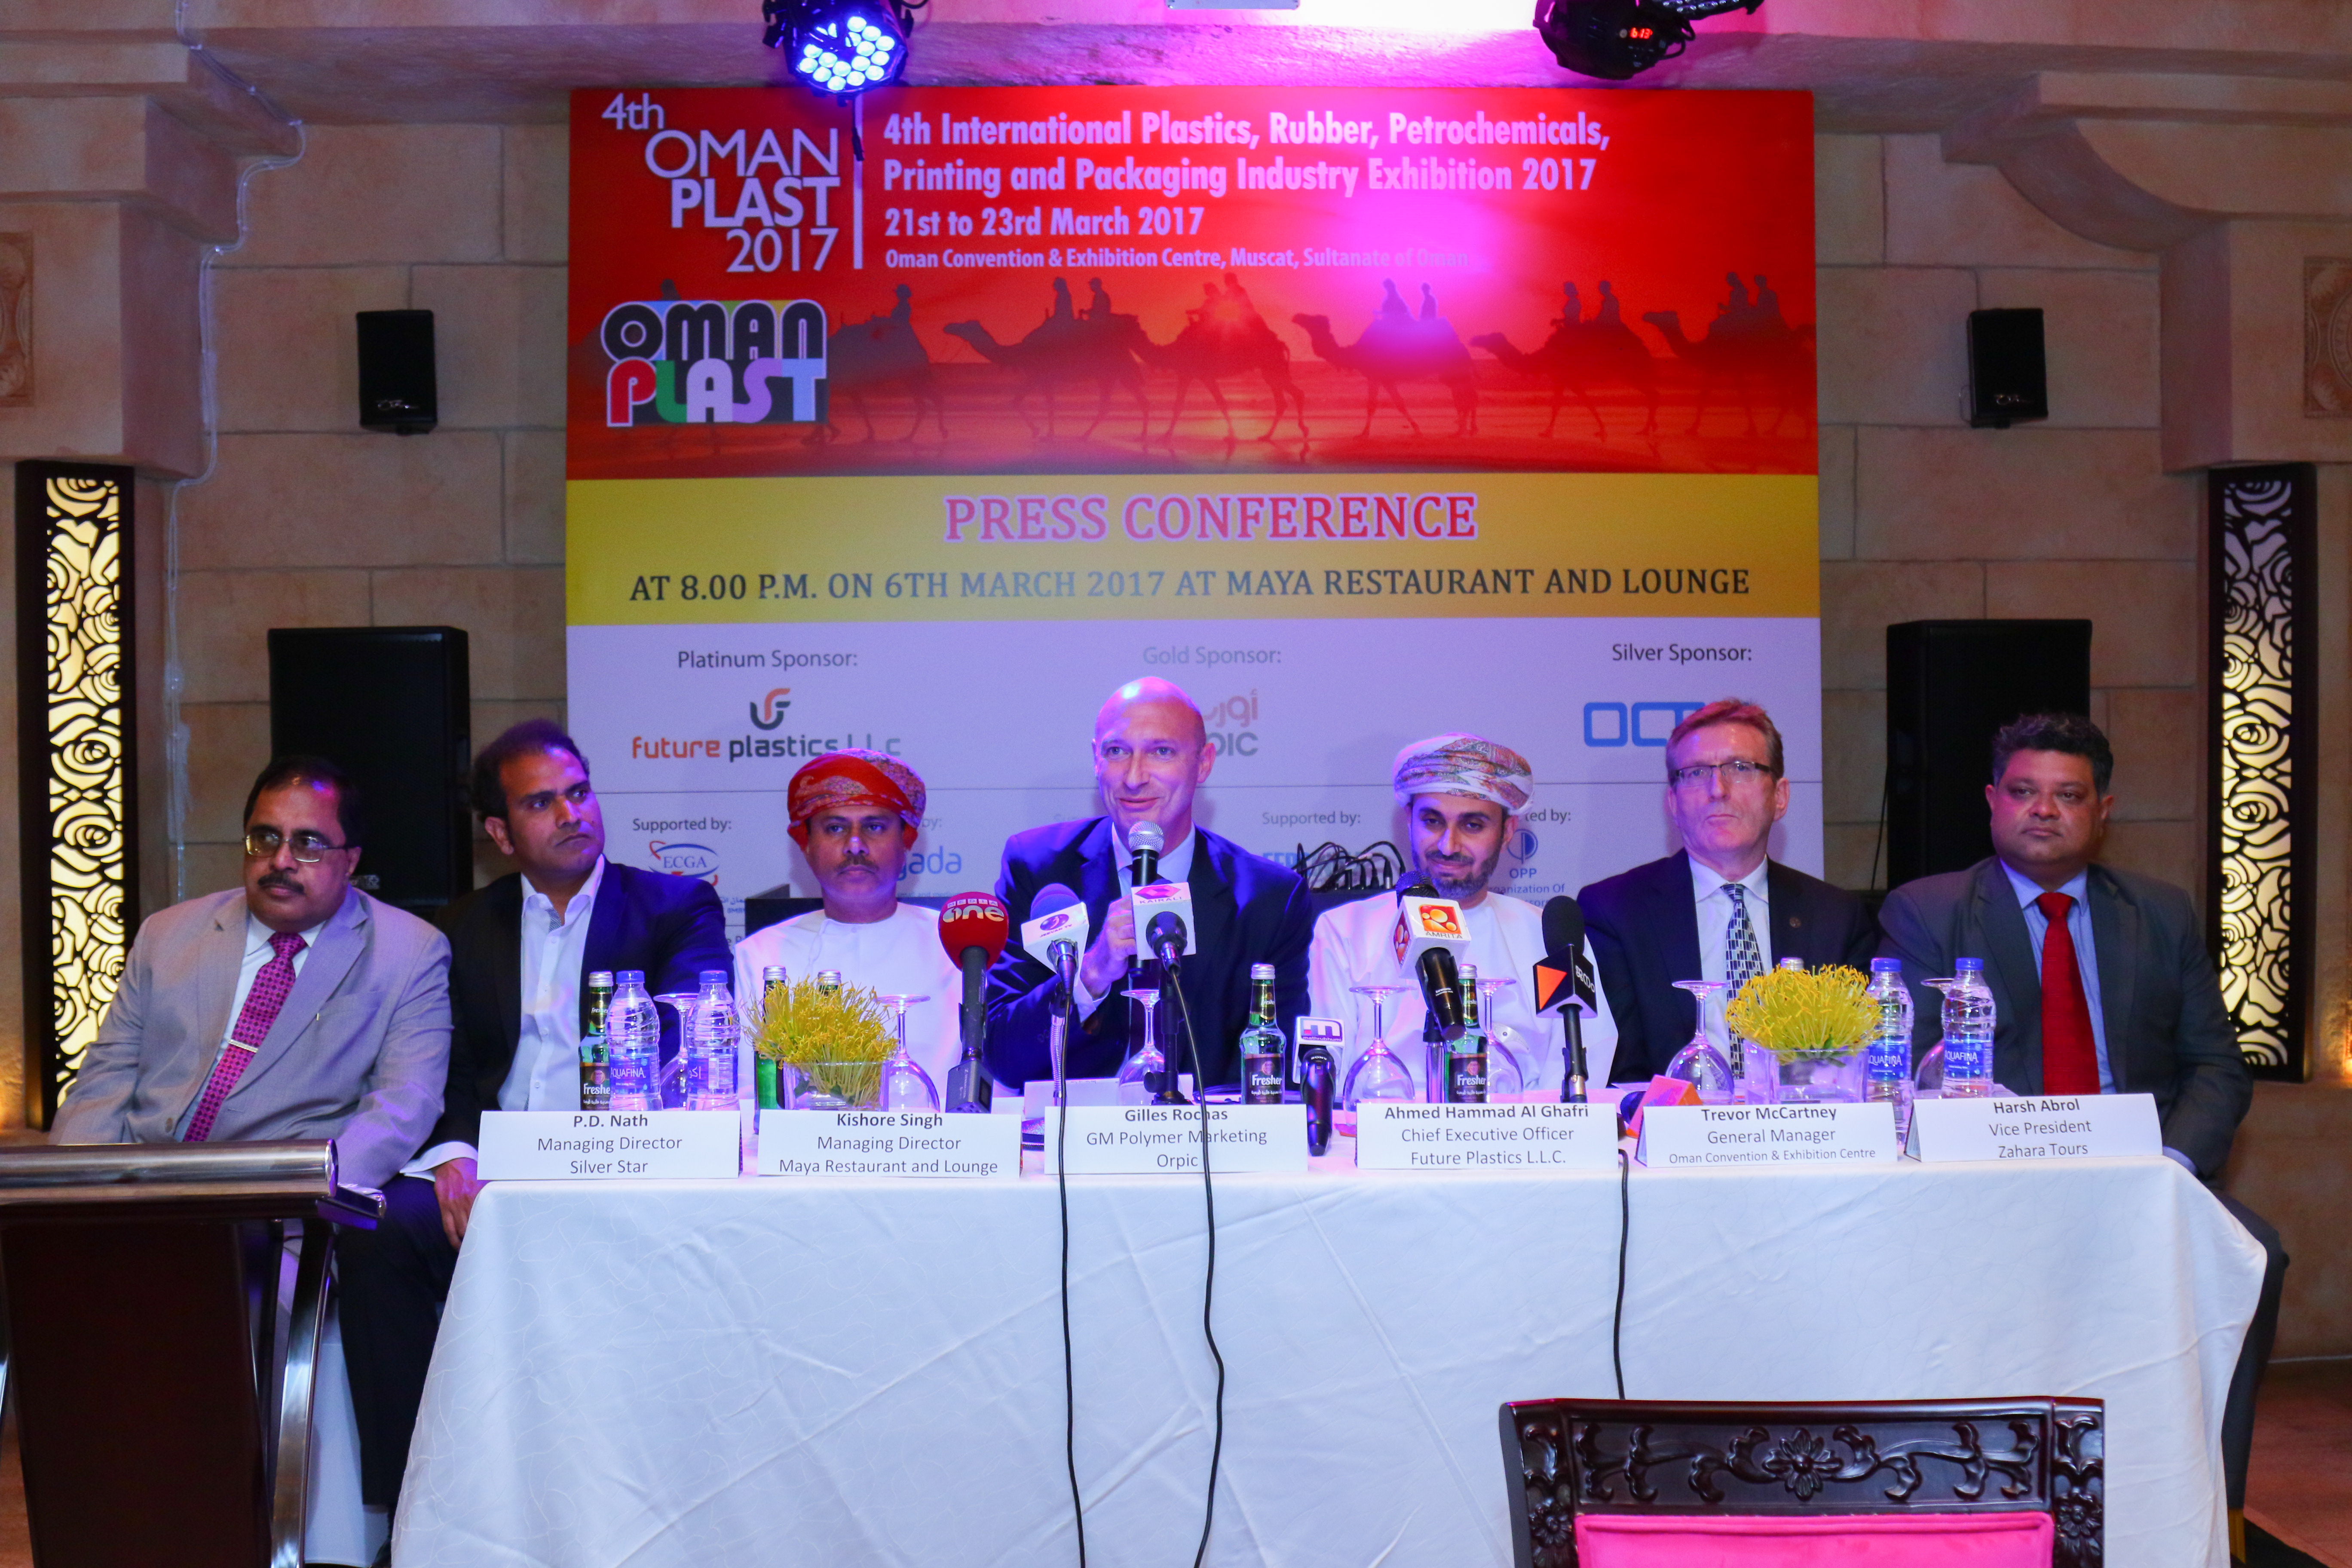 Oman Plast exhibition to be held on March 21